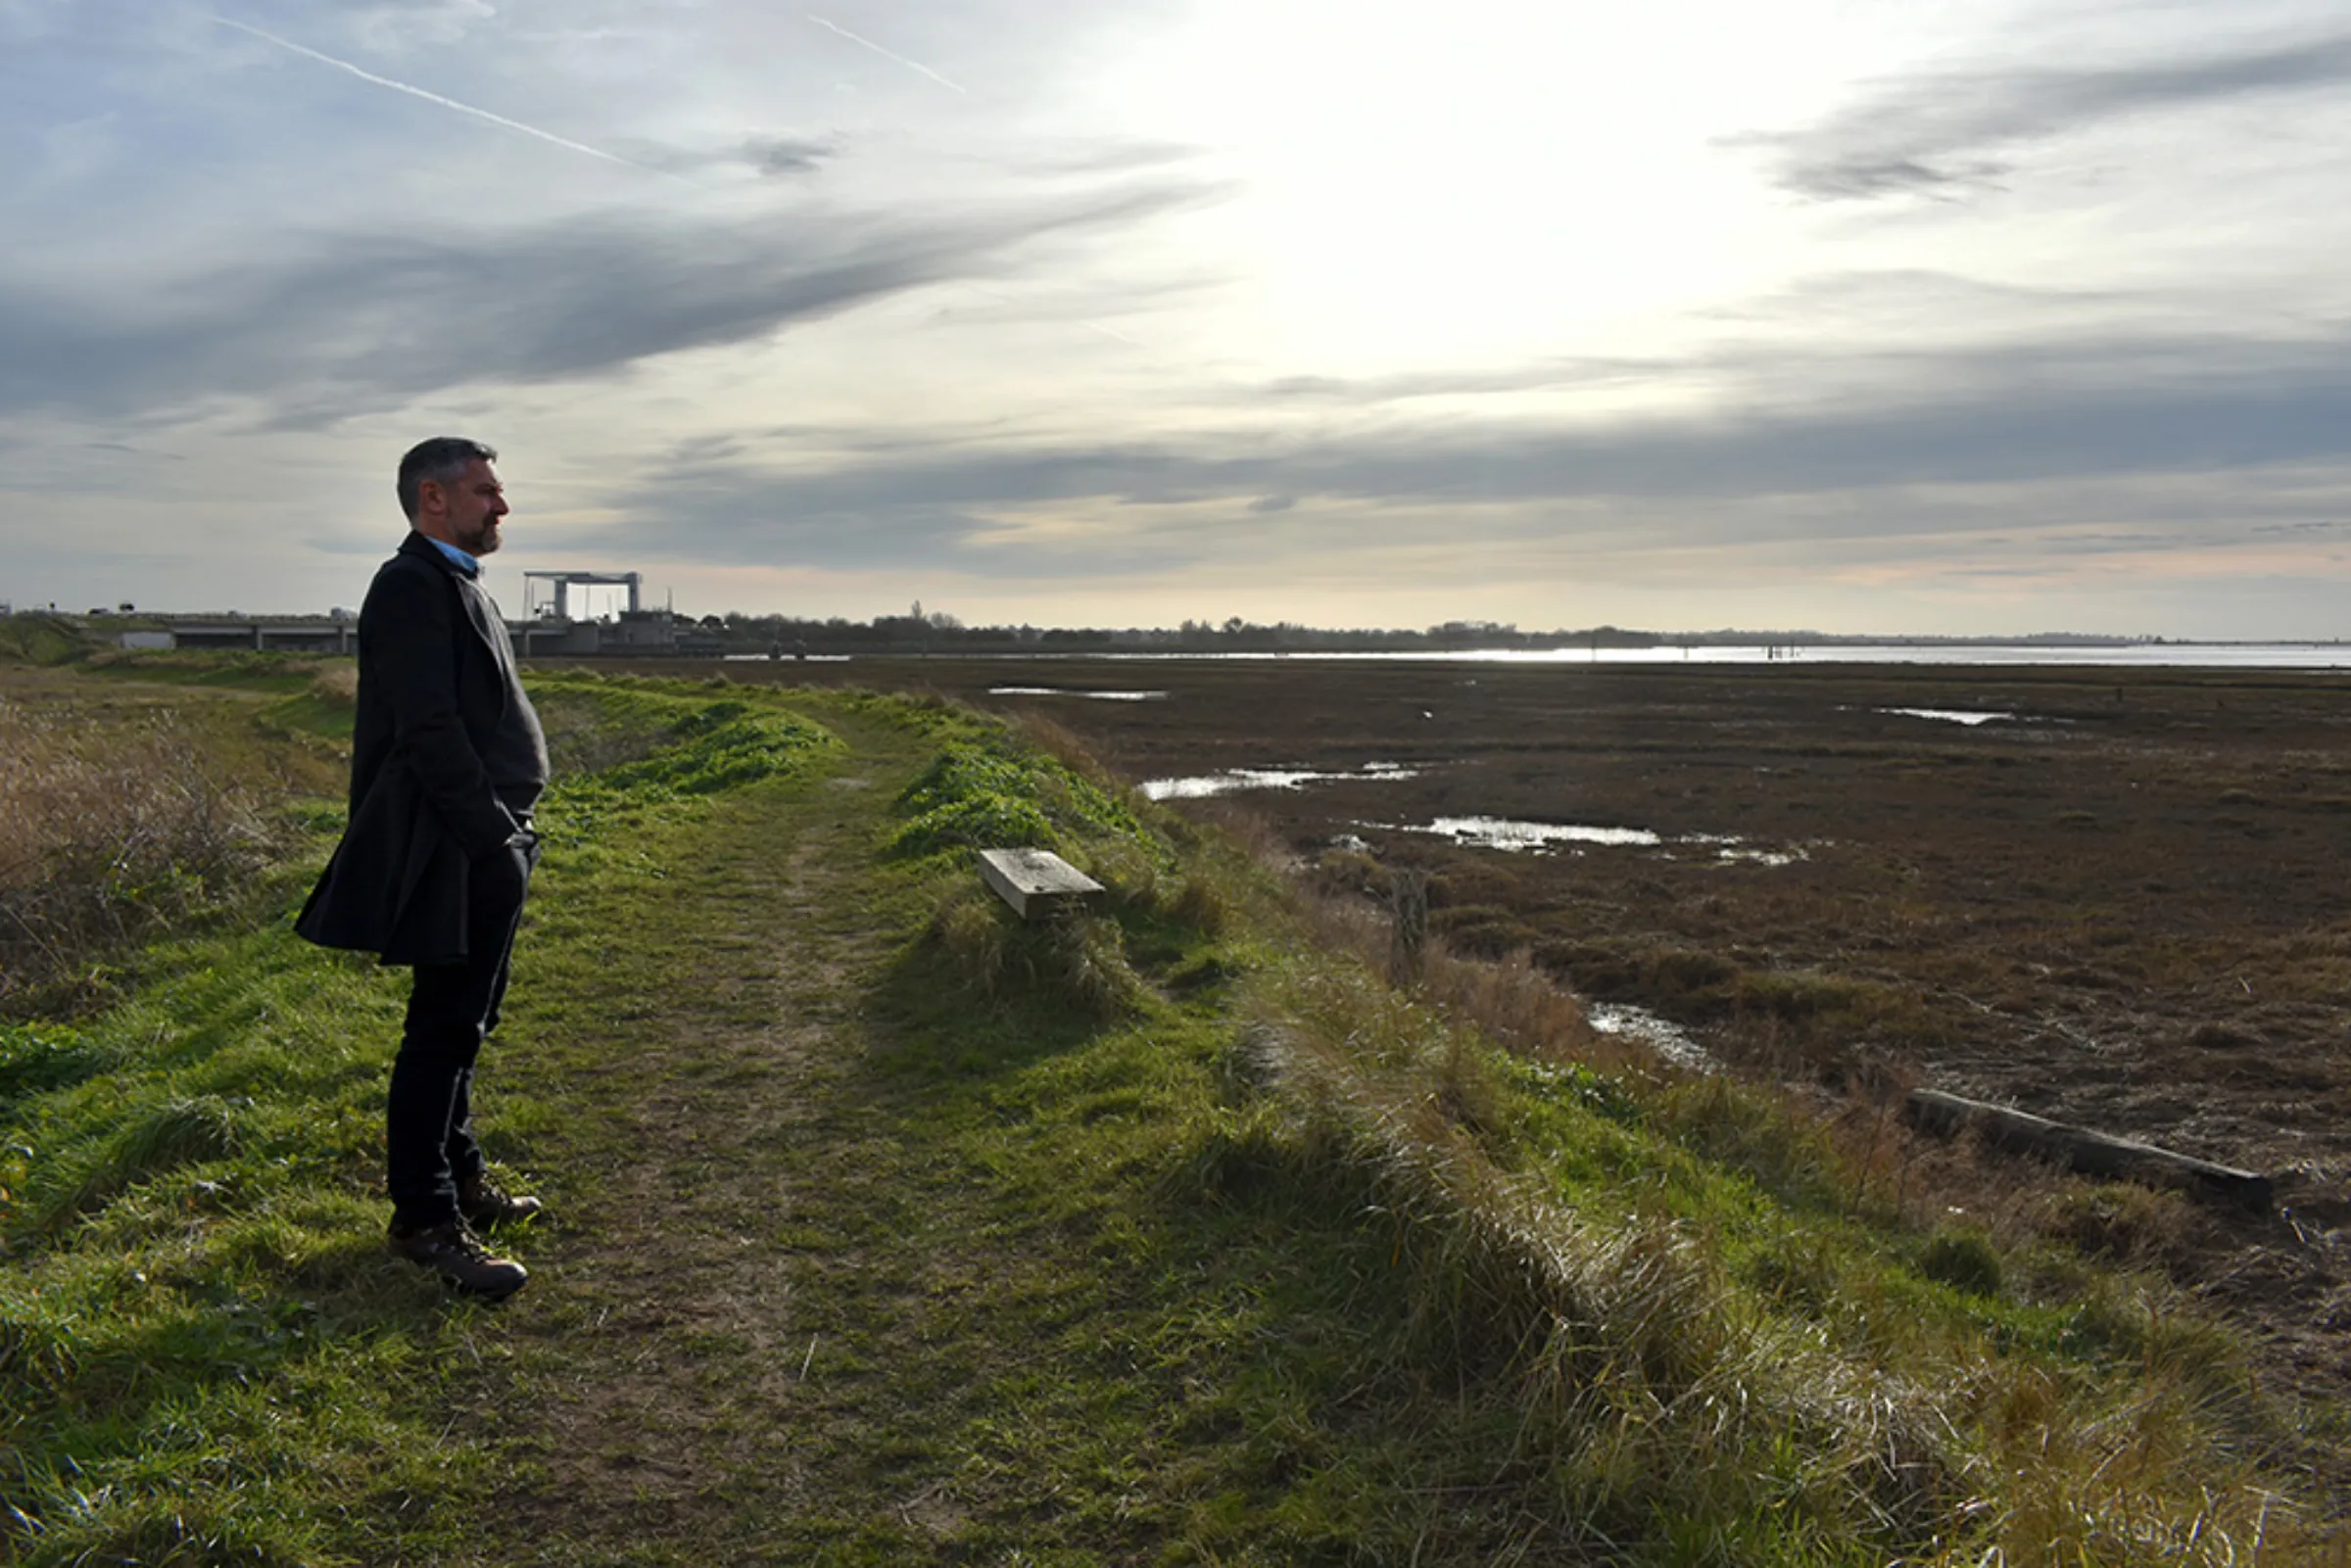 Broads resident and activist Duncan Holmes studies Breydon Water in the floodplain of the River Yare near Great Yarmouth, east England, February 10, 2023. Thomson Reuters Foundation/Rachel Parsons